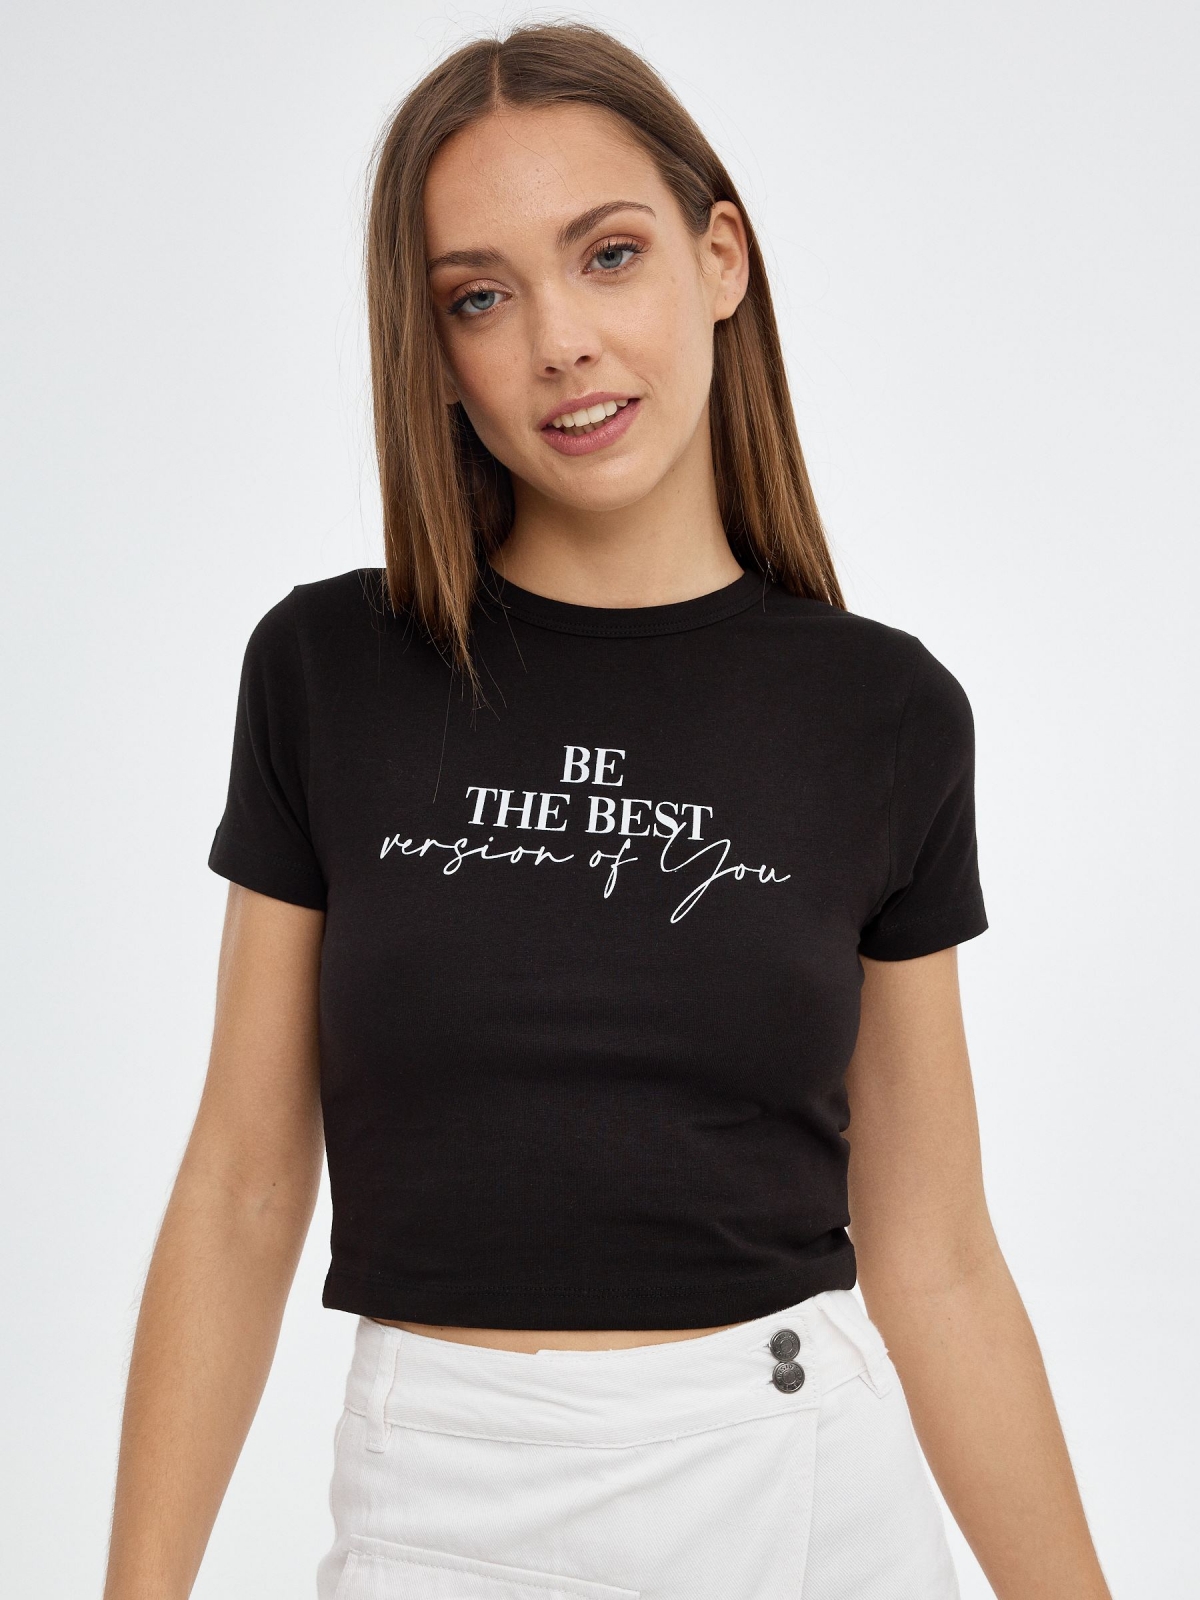 Be the Best T-shirt black middle front view